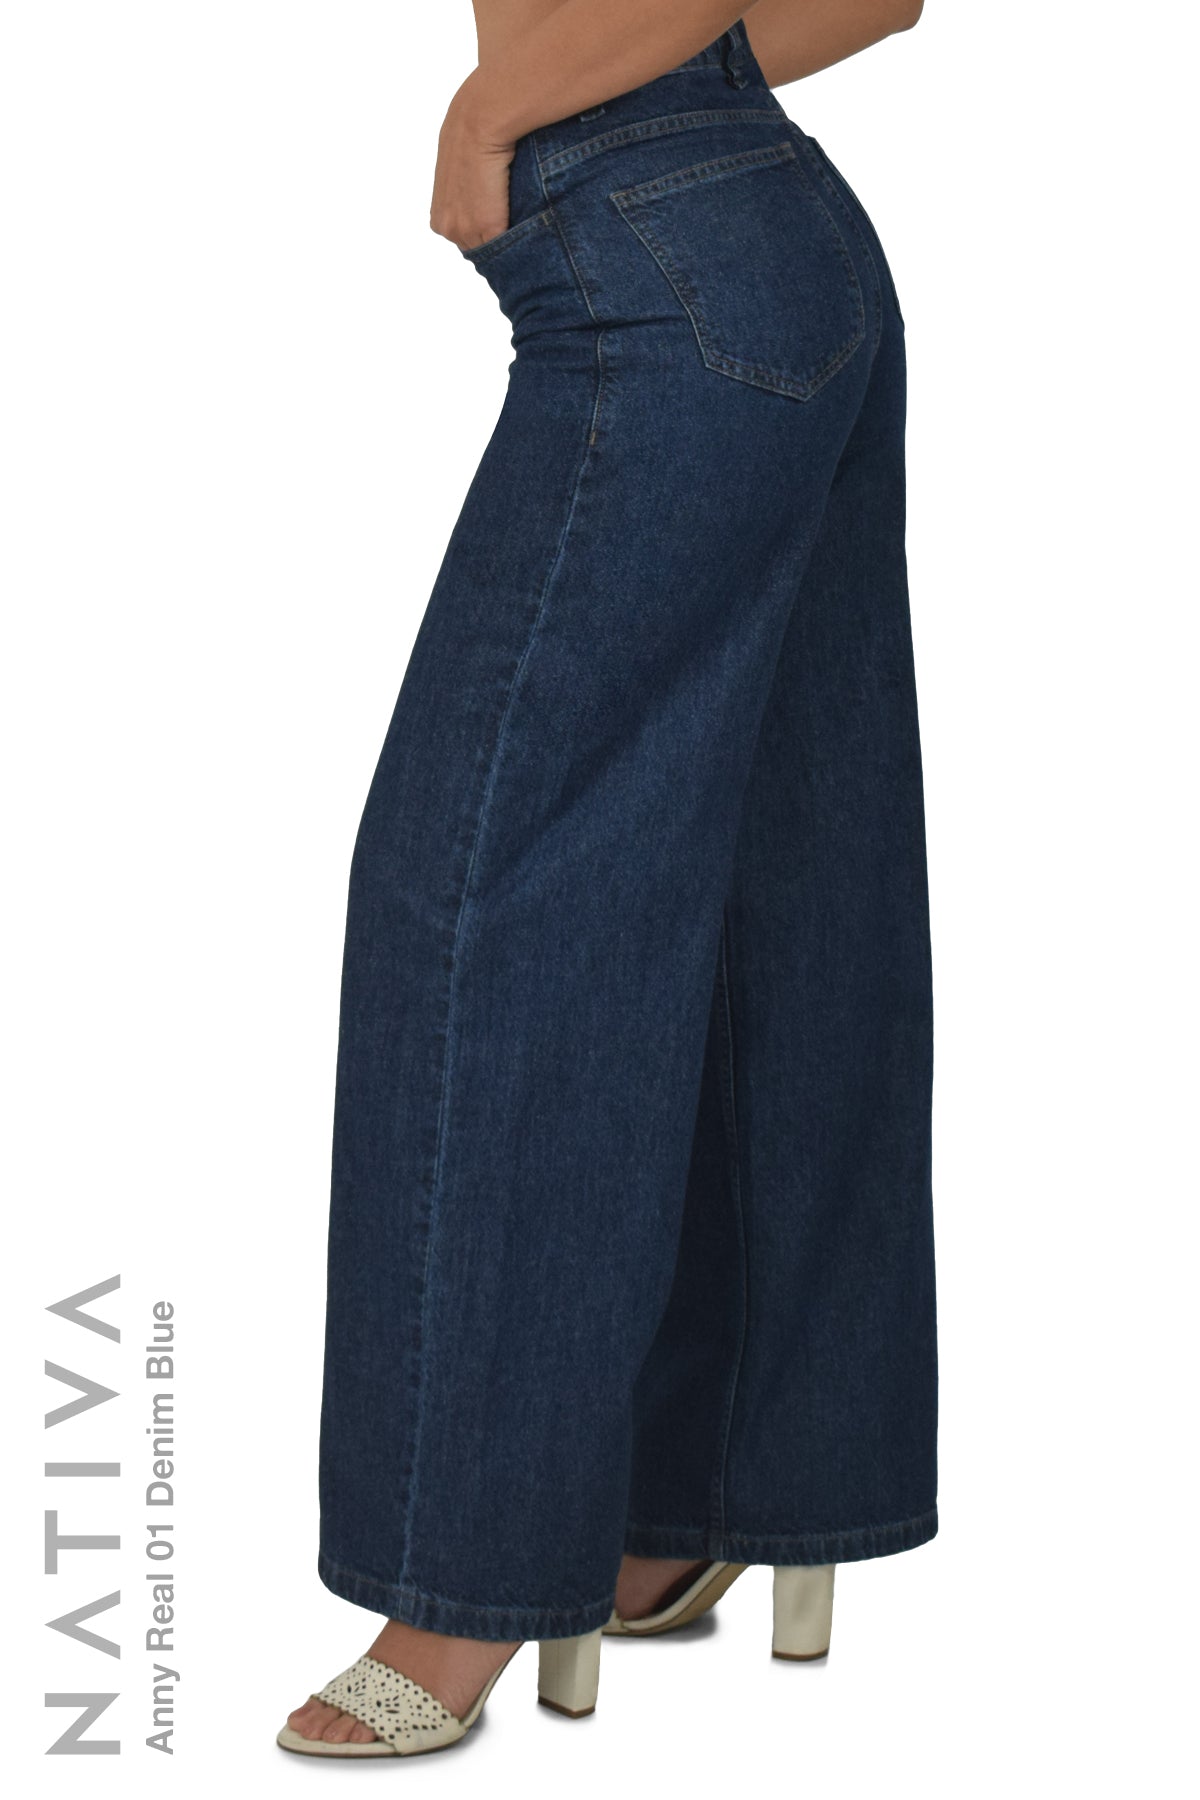 NATIVA, RIGID JEANS. ANNY REAL 01 DENIM BLUE, High-Rise Palazzo Jeans 100%  True Denim Native Virgin Cotton Ideal Comfort Relaxed Fit